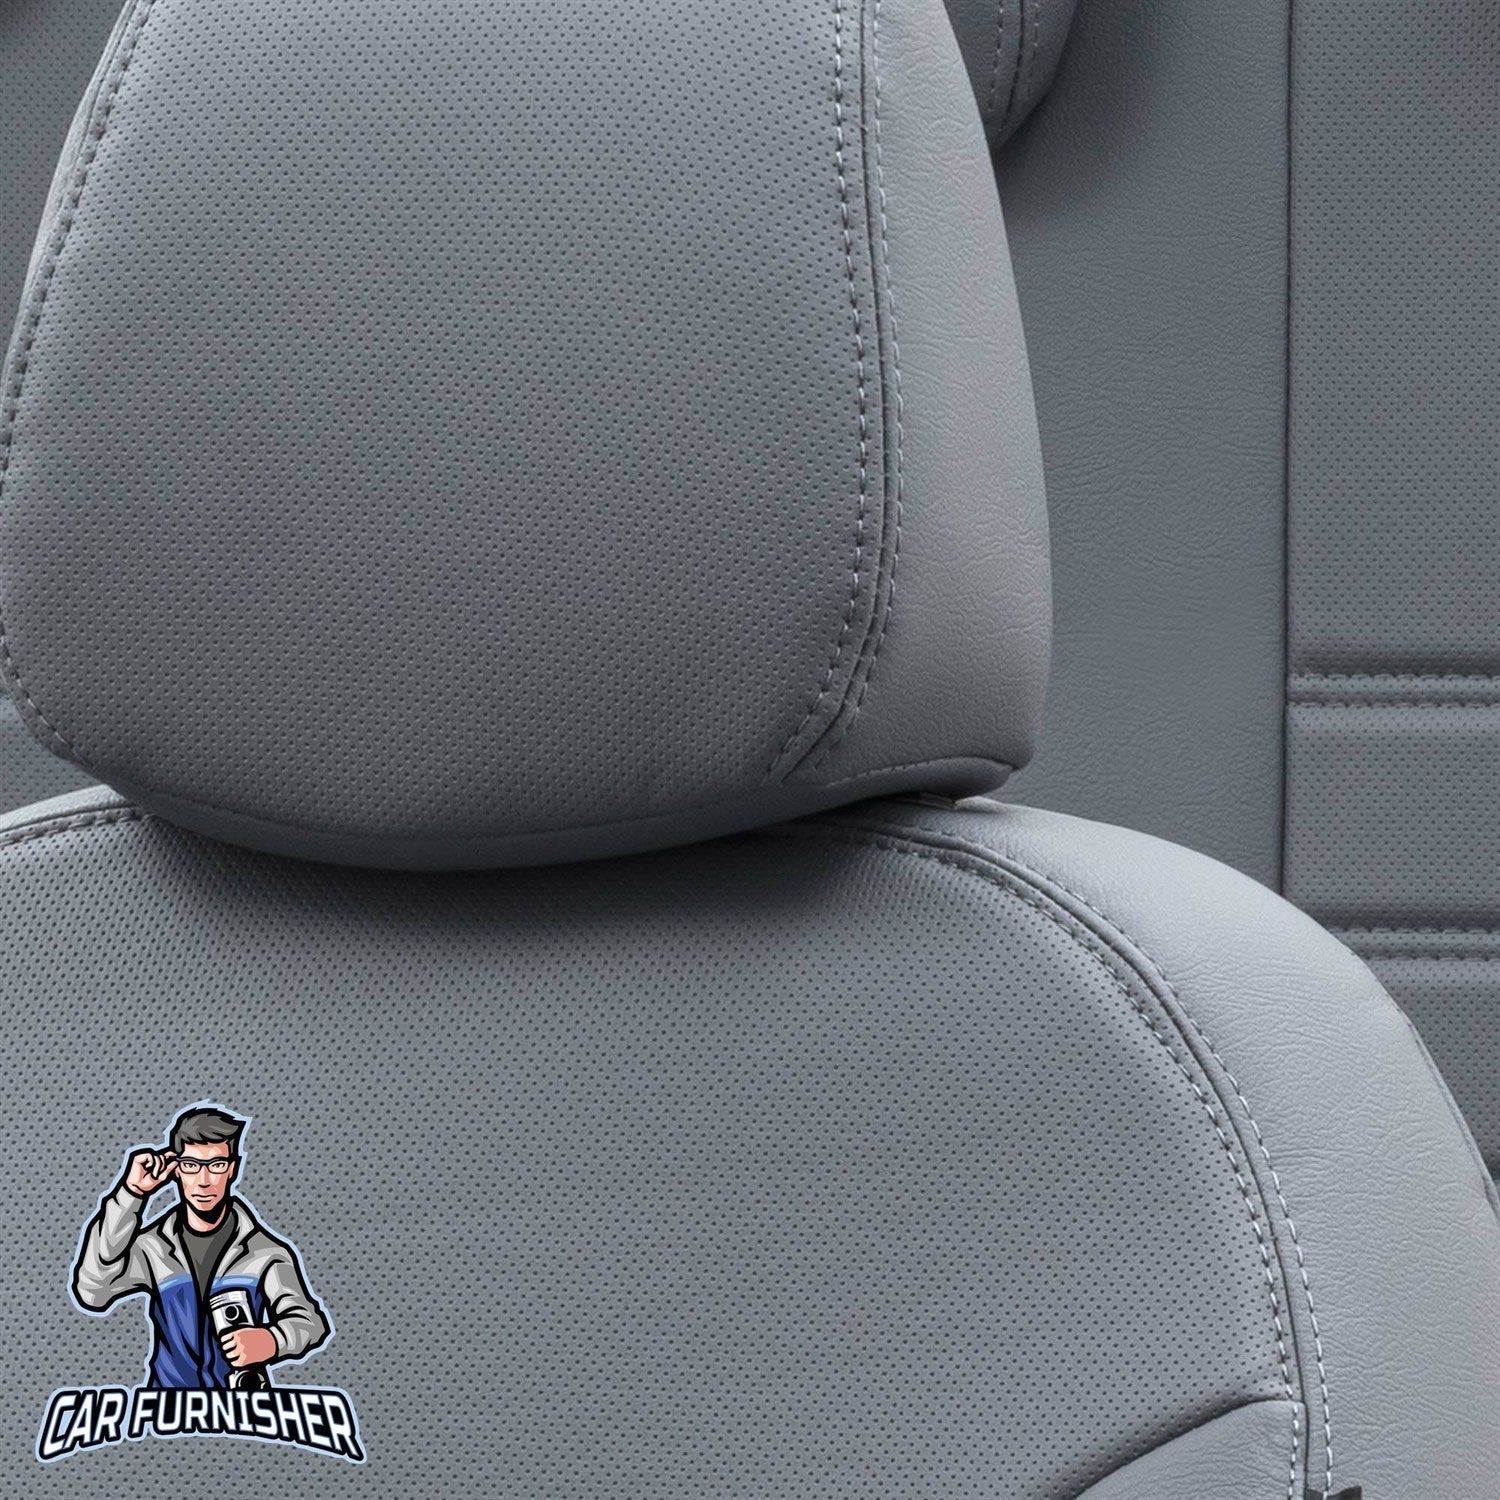 Isuzu L35 Seat Cover Istanbul Leather Design Smoked Leather